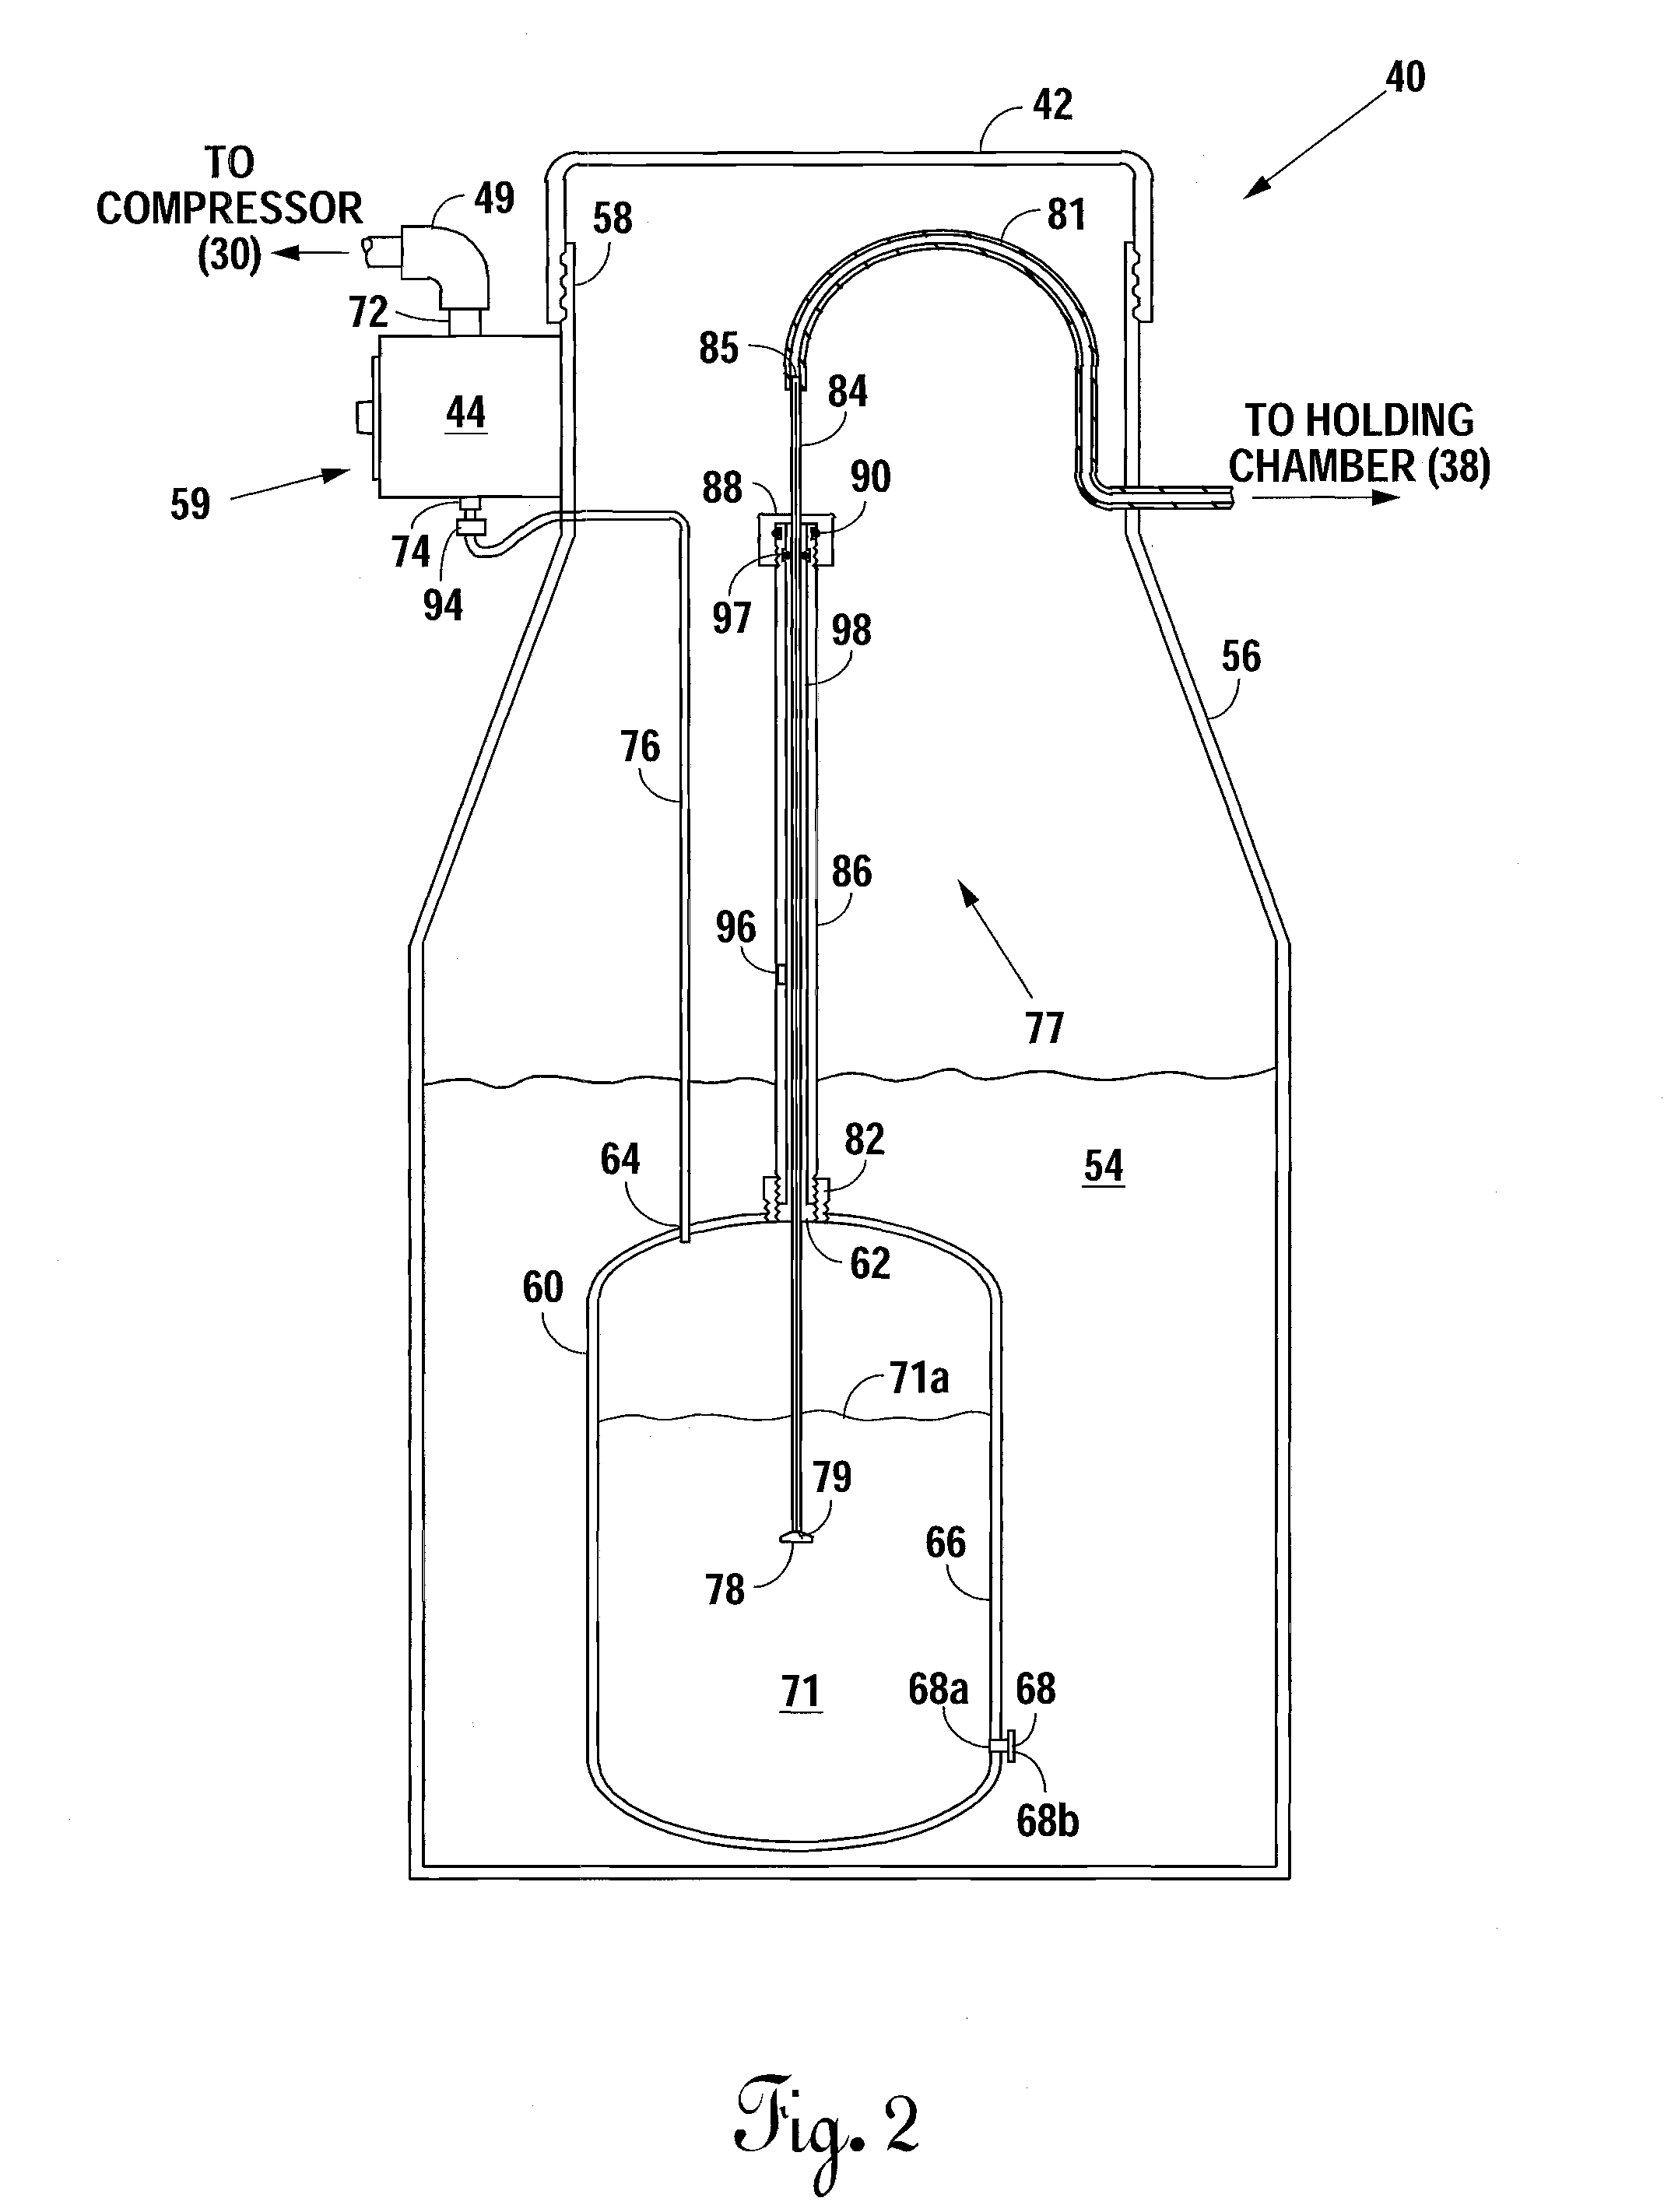 Pressure-Actuated Liquid Disinfectant Dispenser and Method for an Aerobic Treatment System